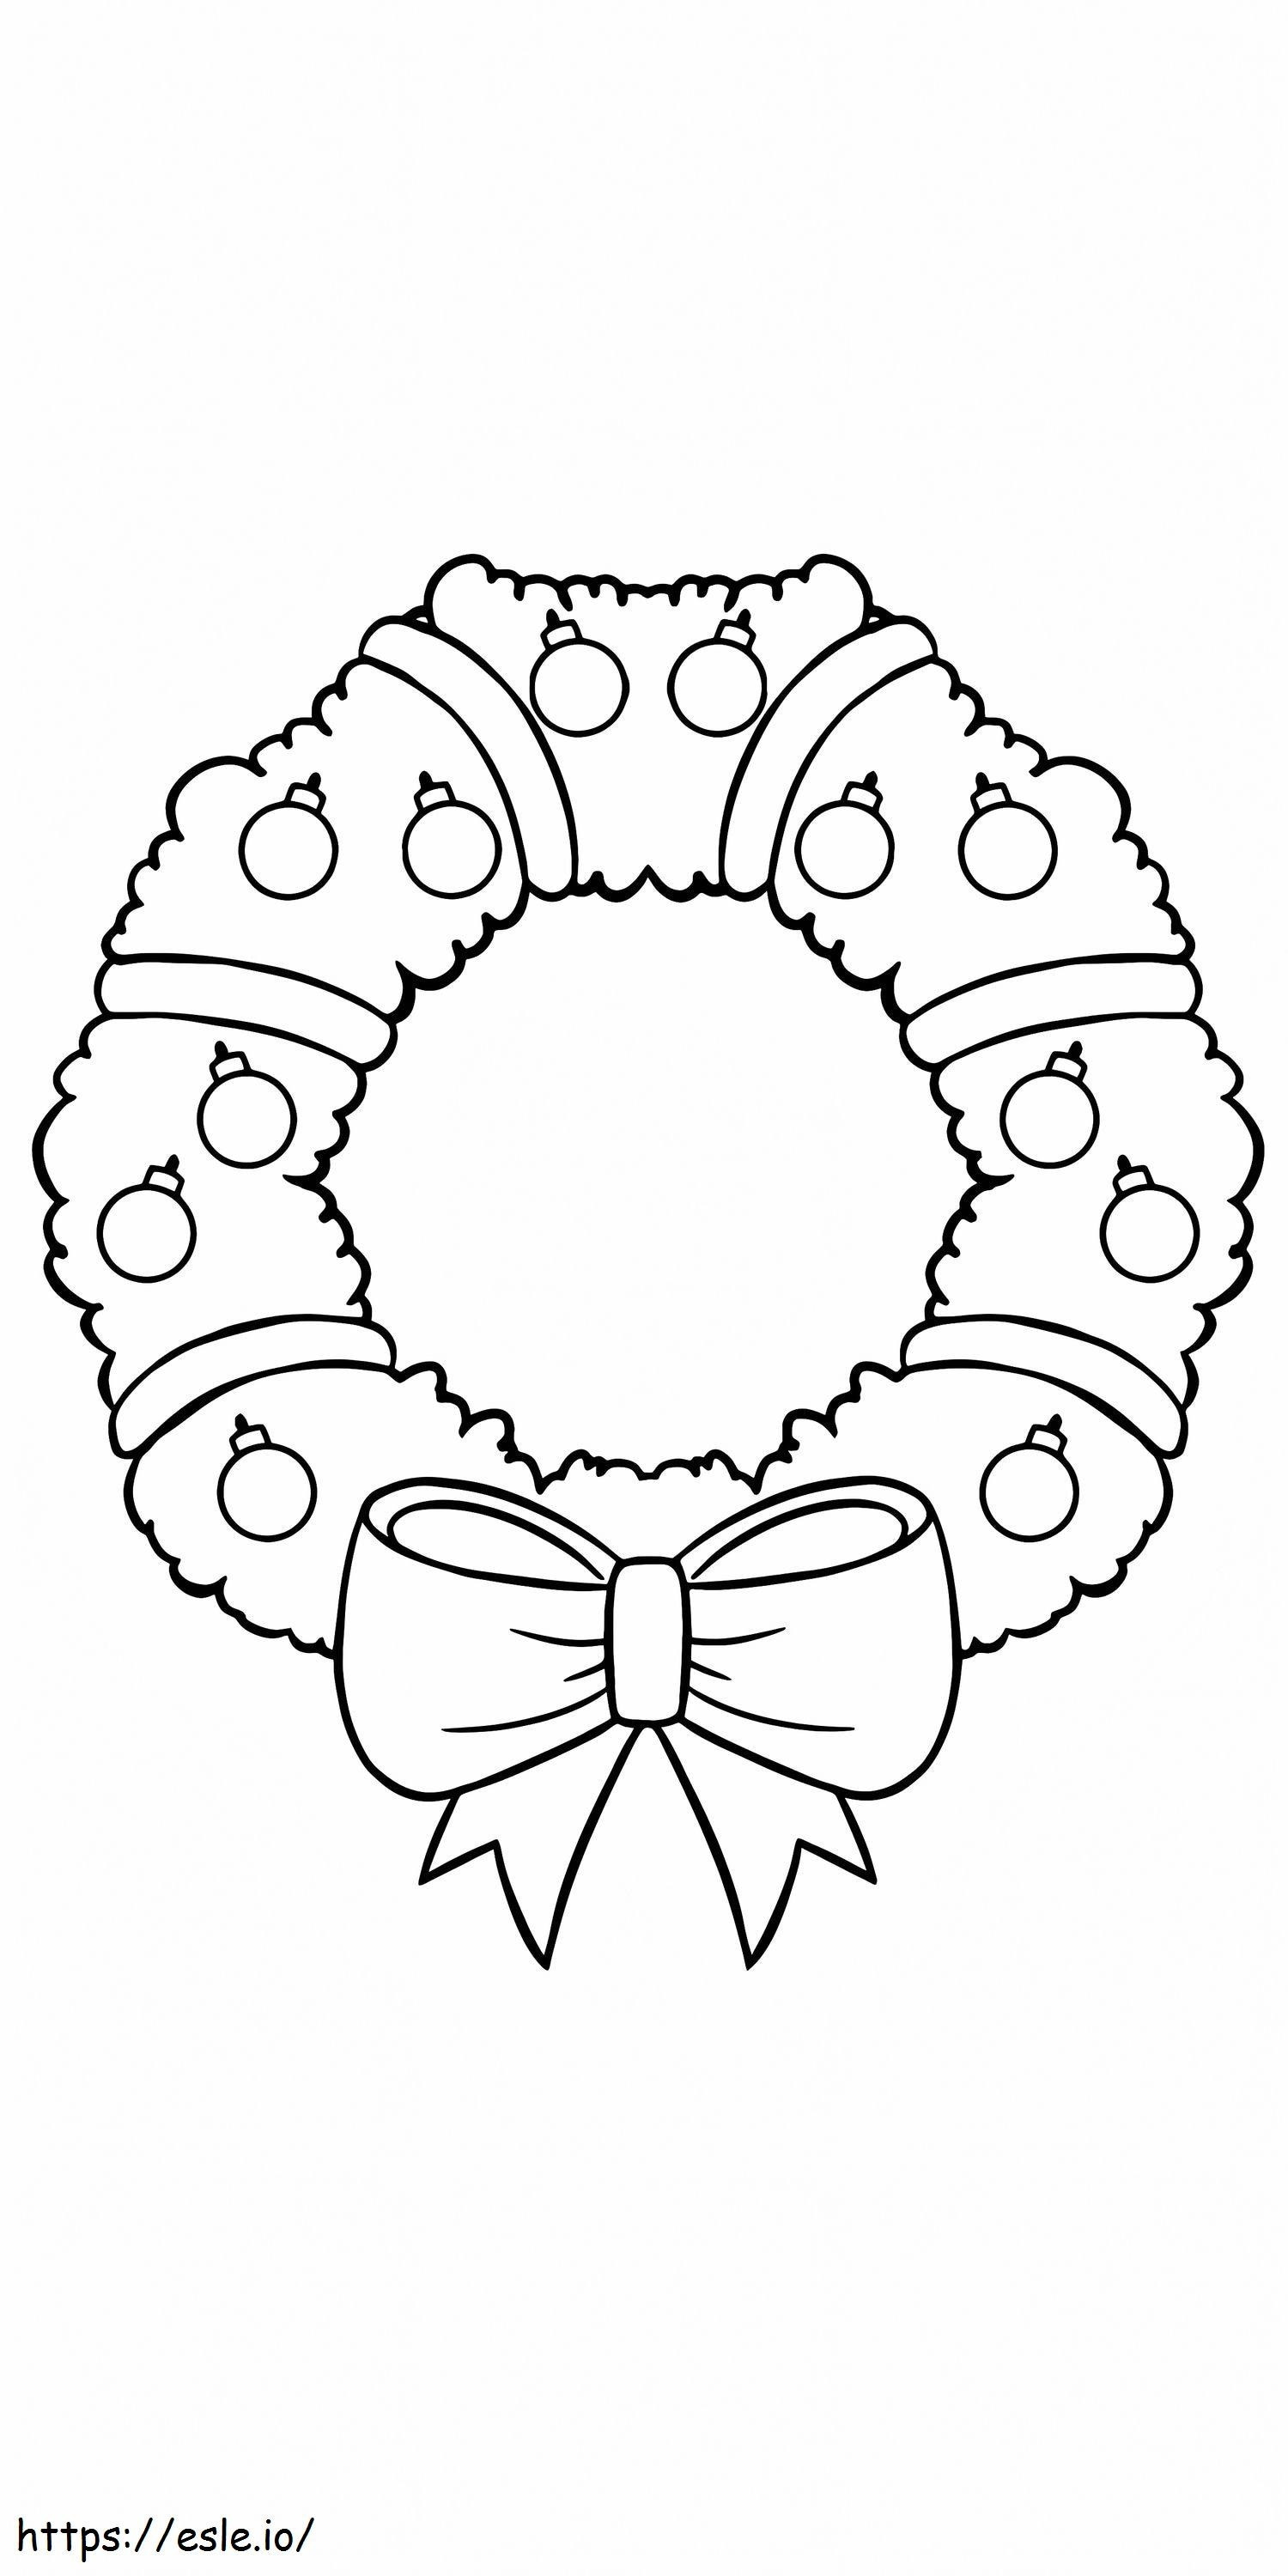 Easter Wreath Printable 3 coloring page